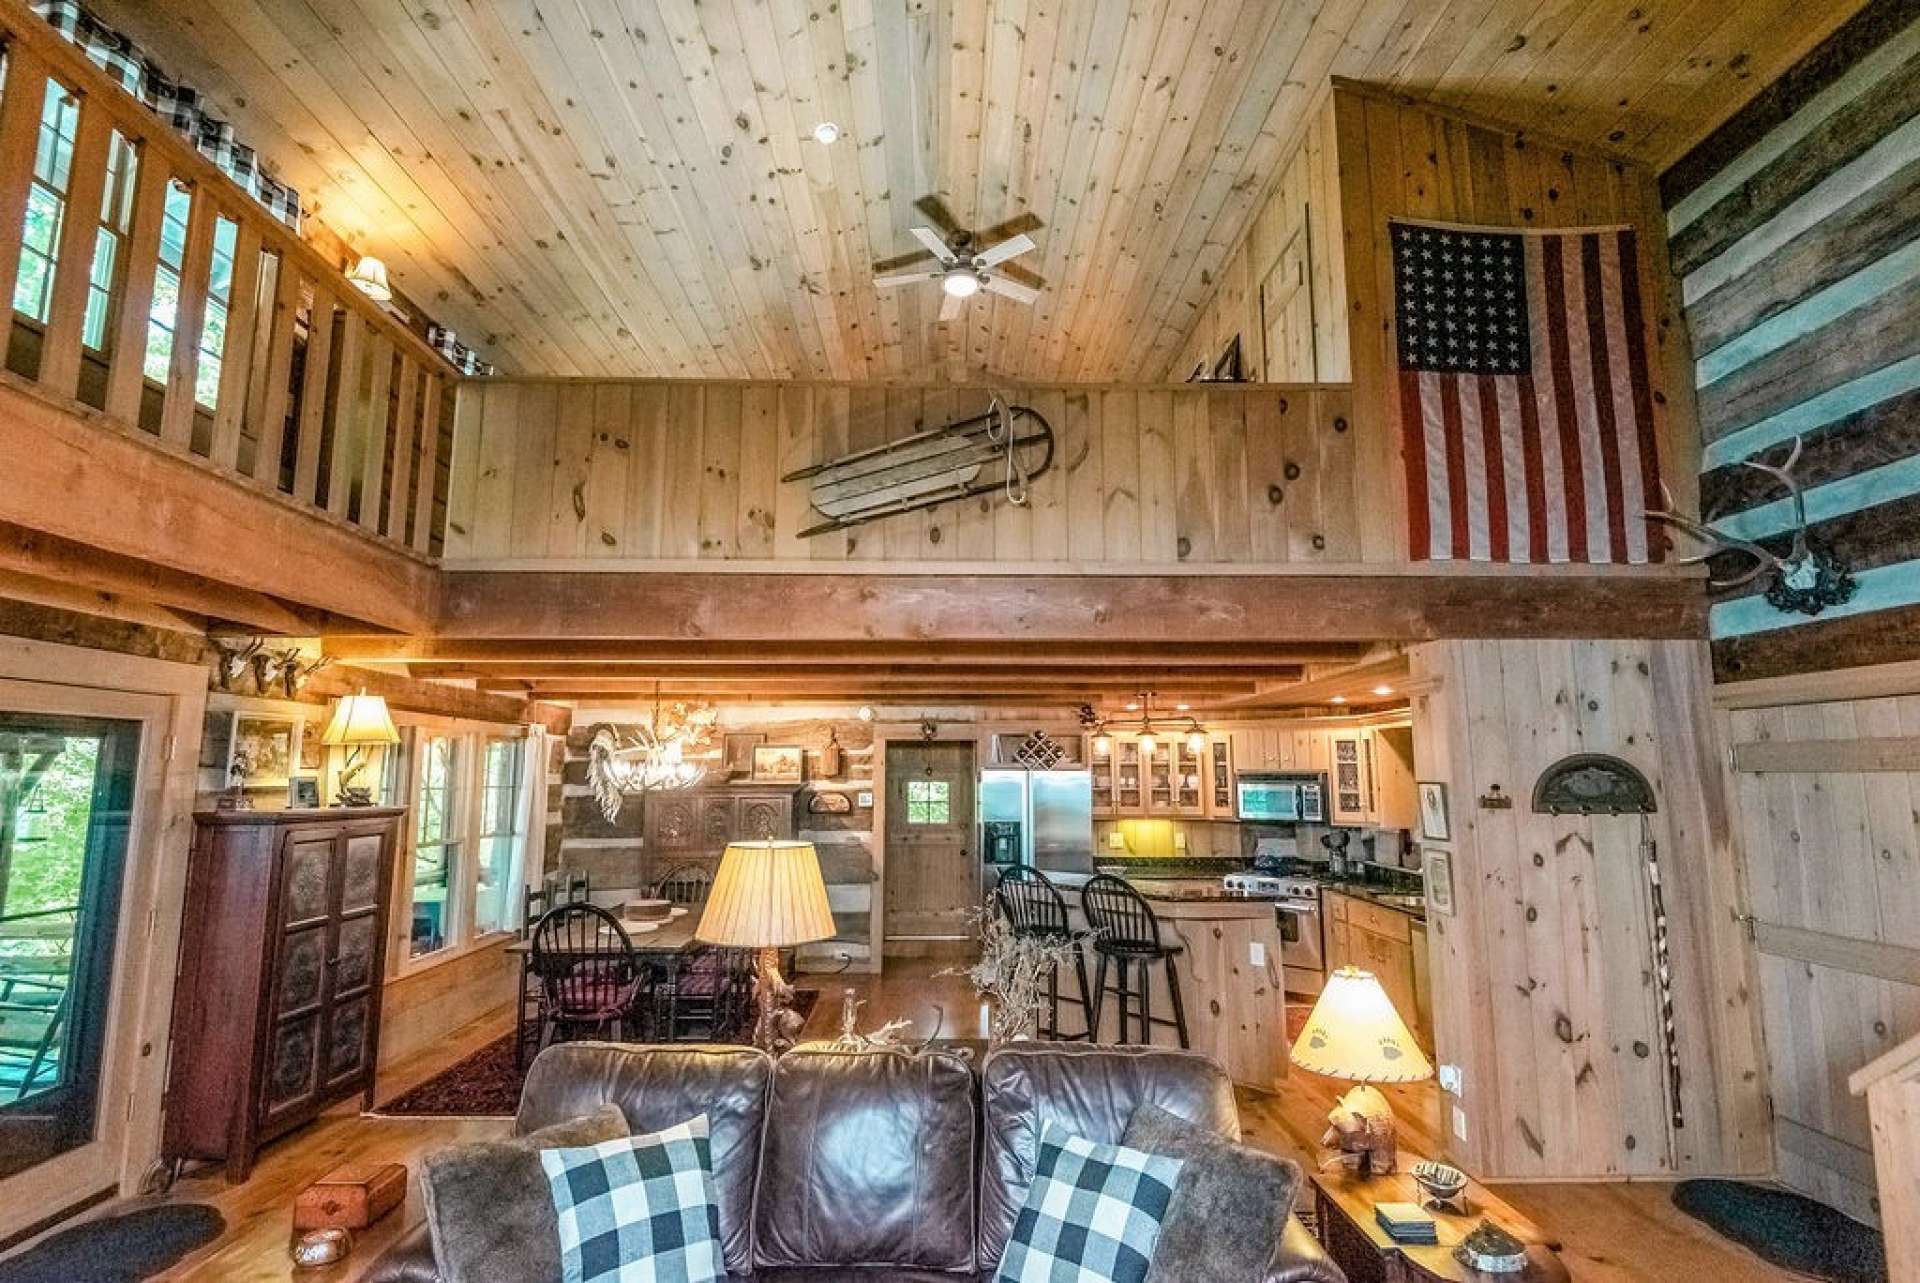 The open concept of this home is perfect for being together in the mountains with family, friends, or just your sweetie.